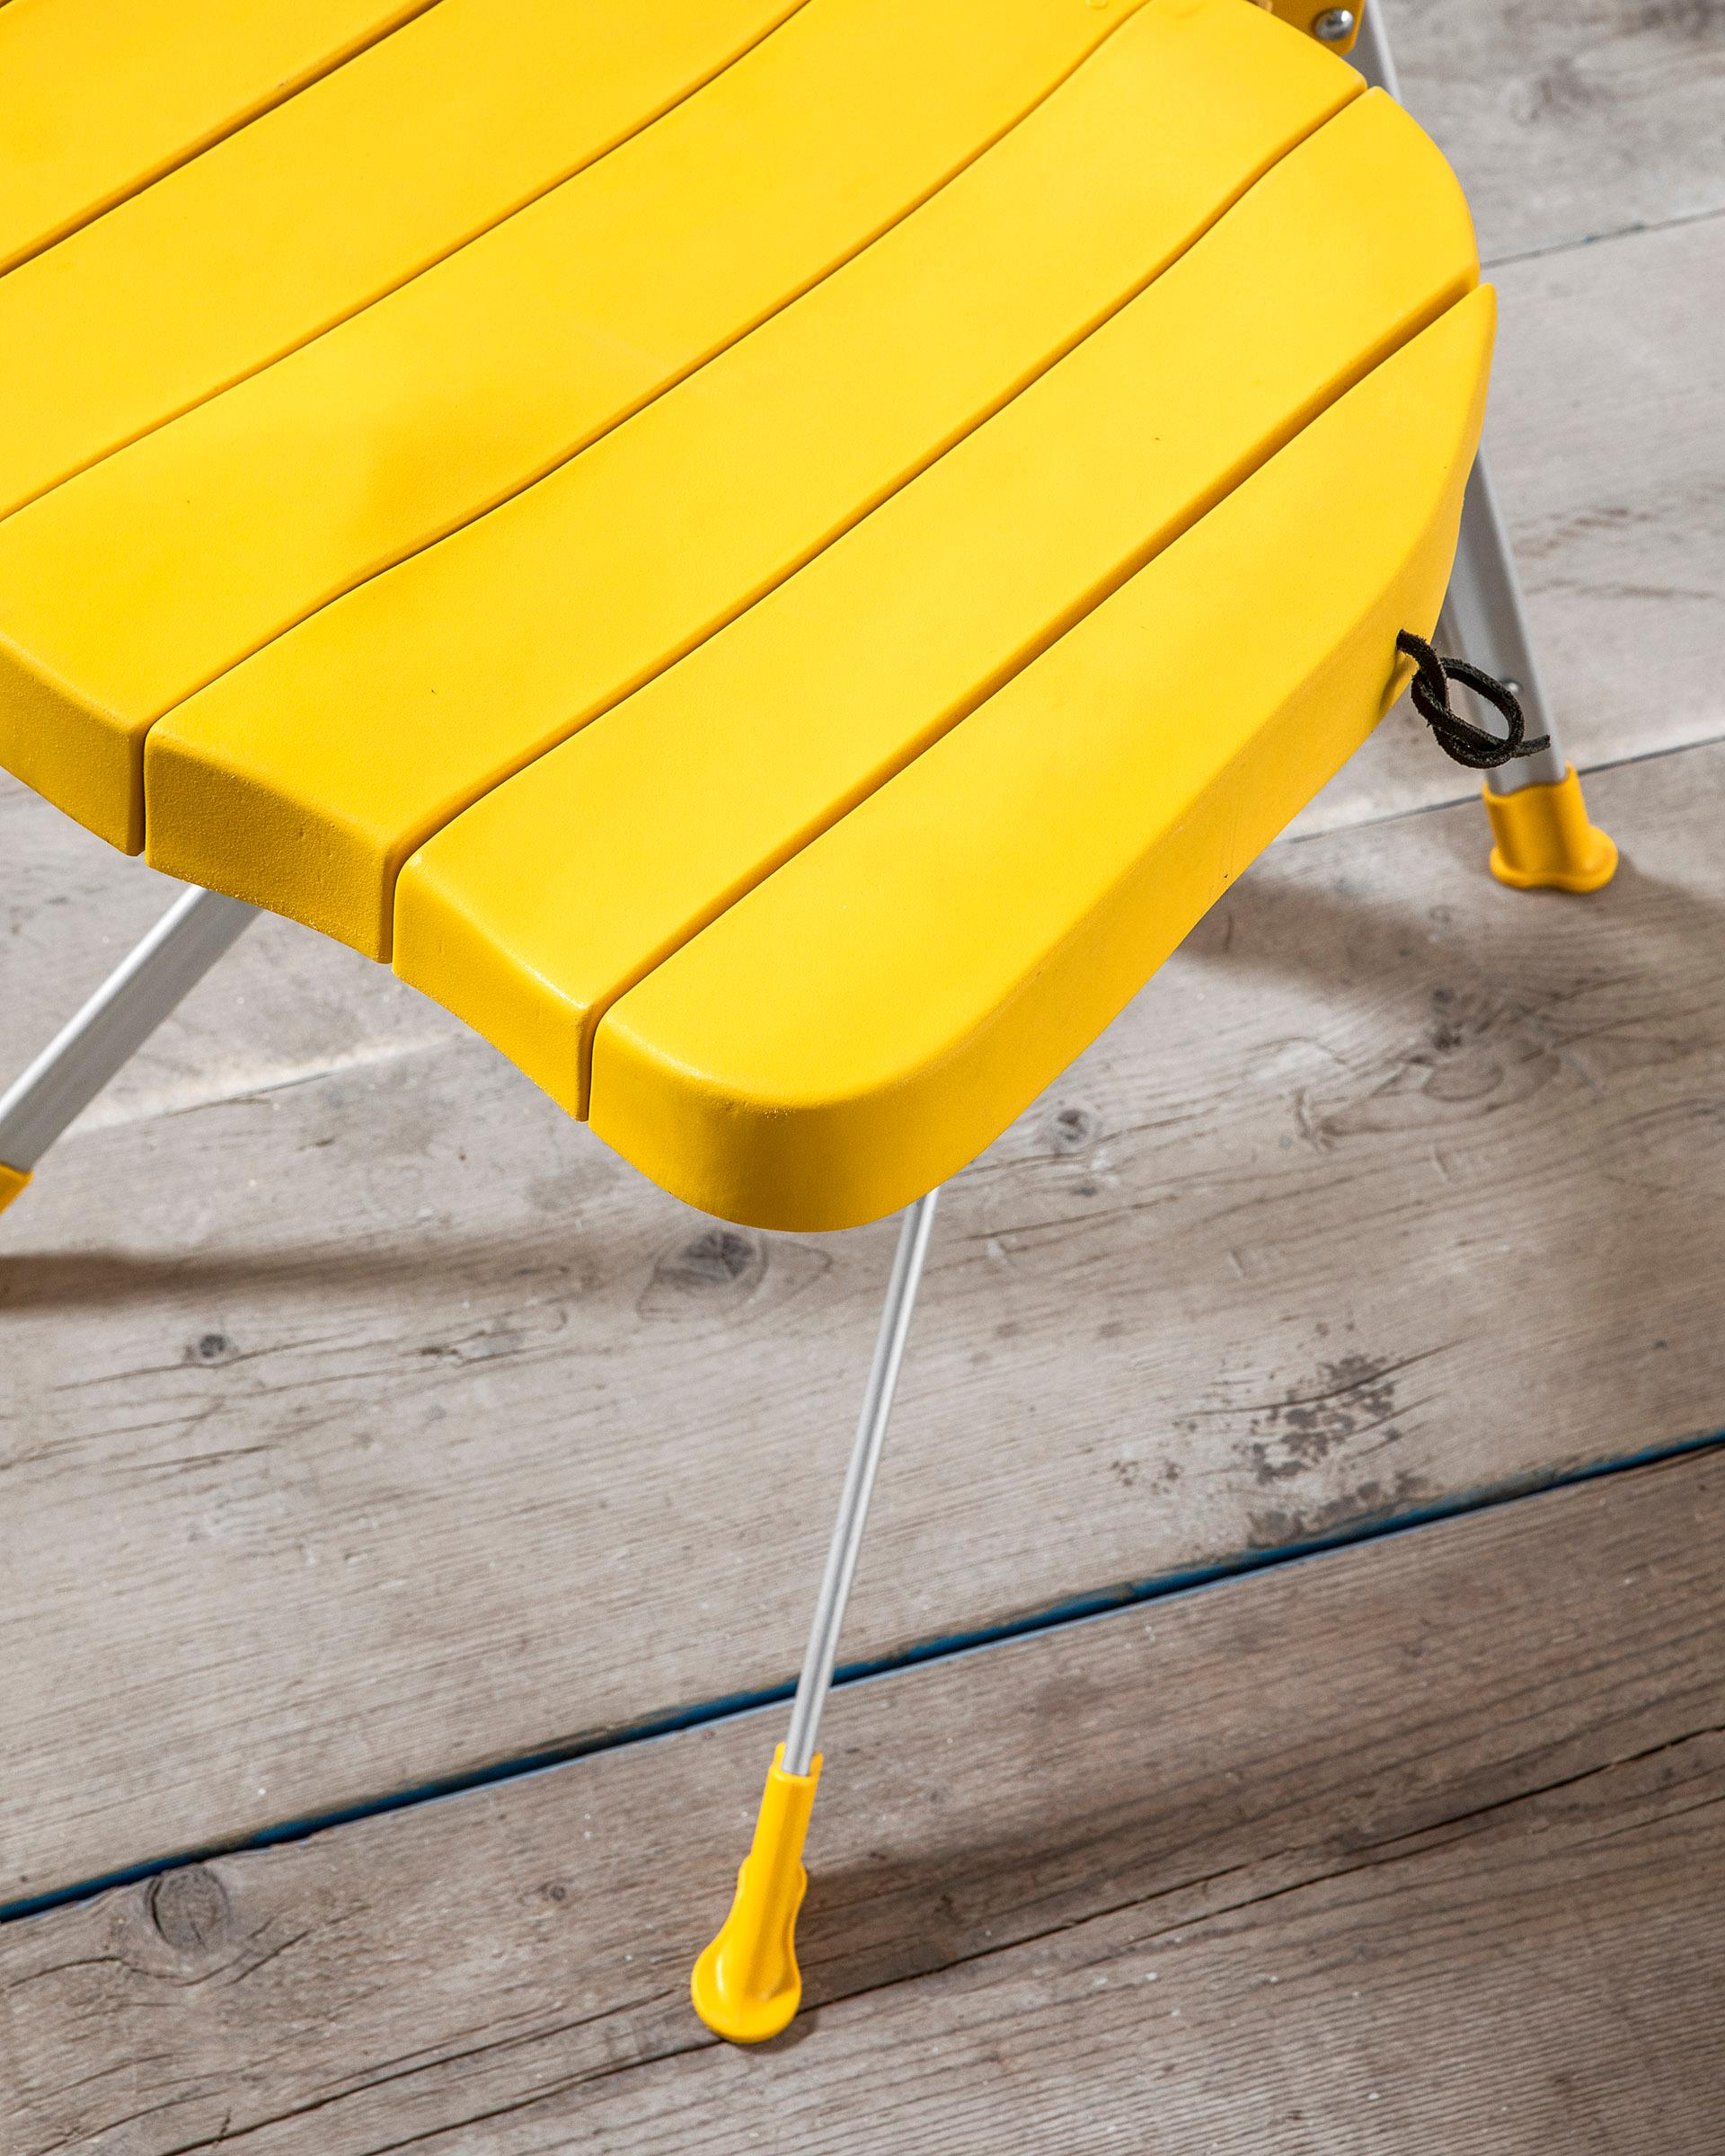 Modern 20th Century Gaetano Pesce Umbrella Chair Folding and Transportable Yellow For Sale